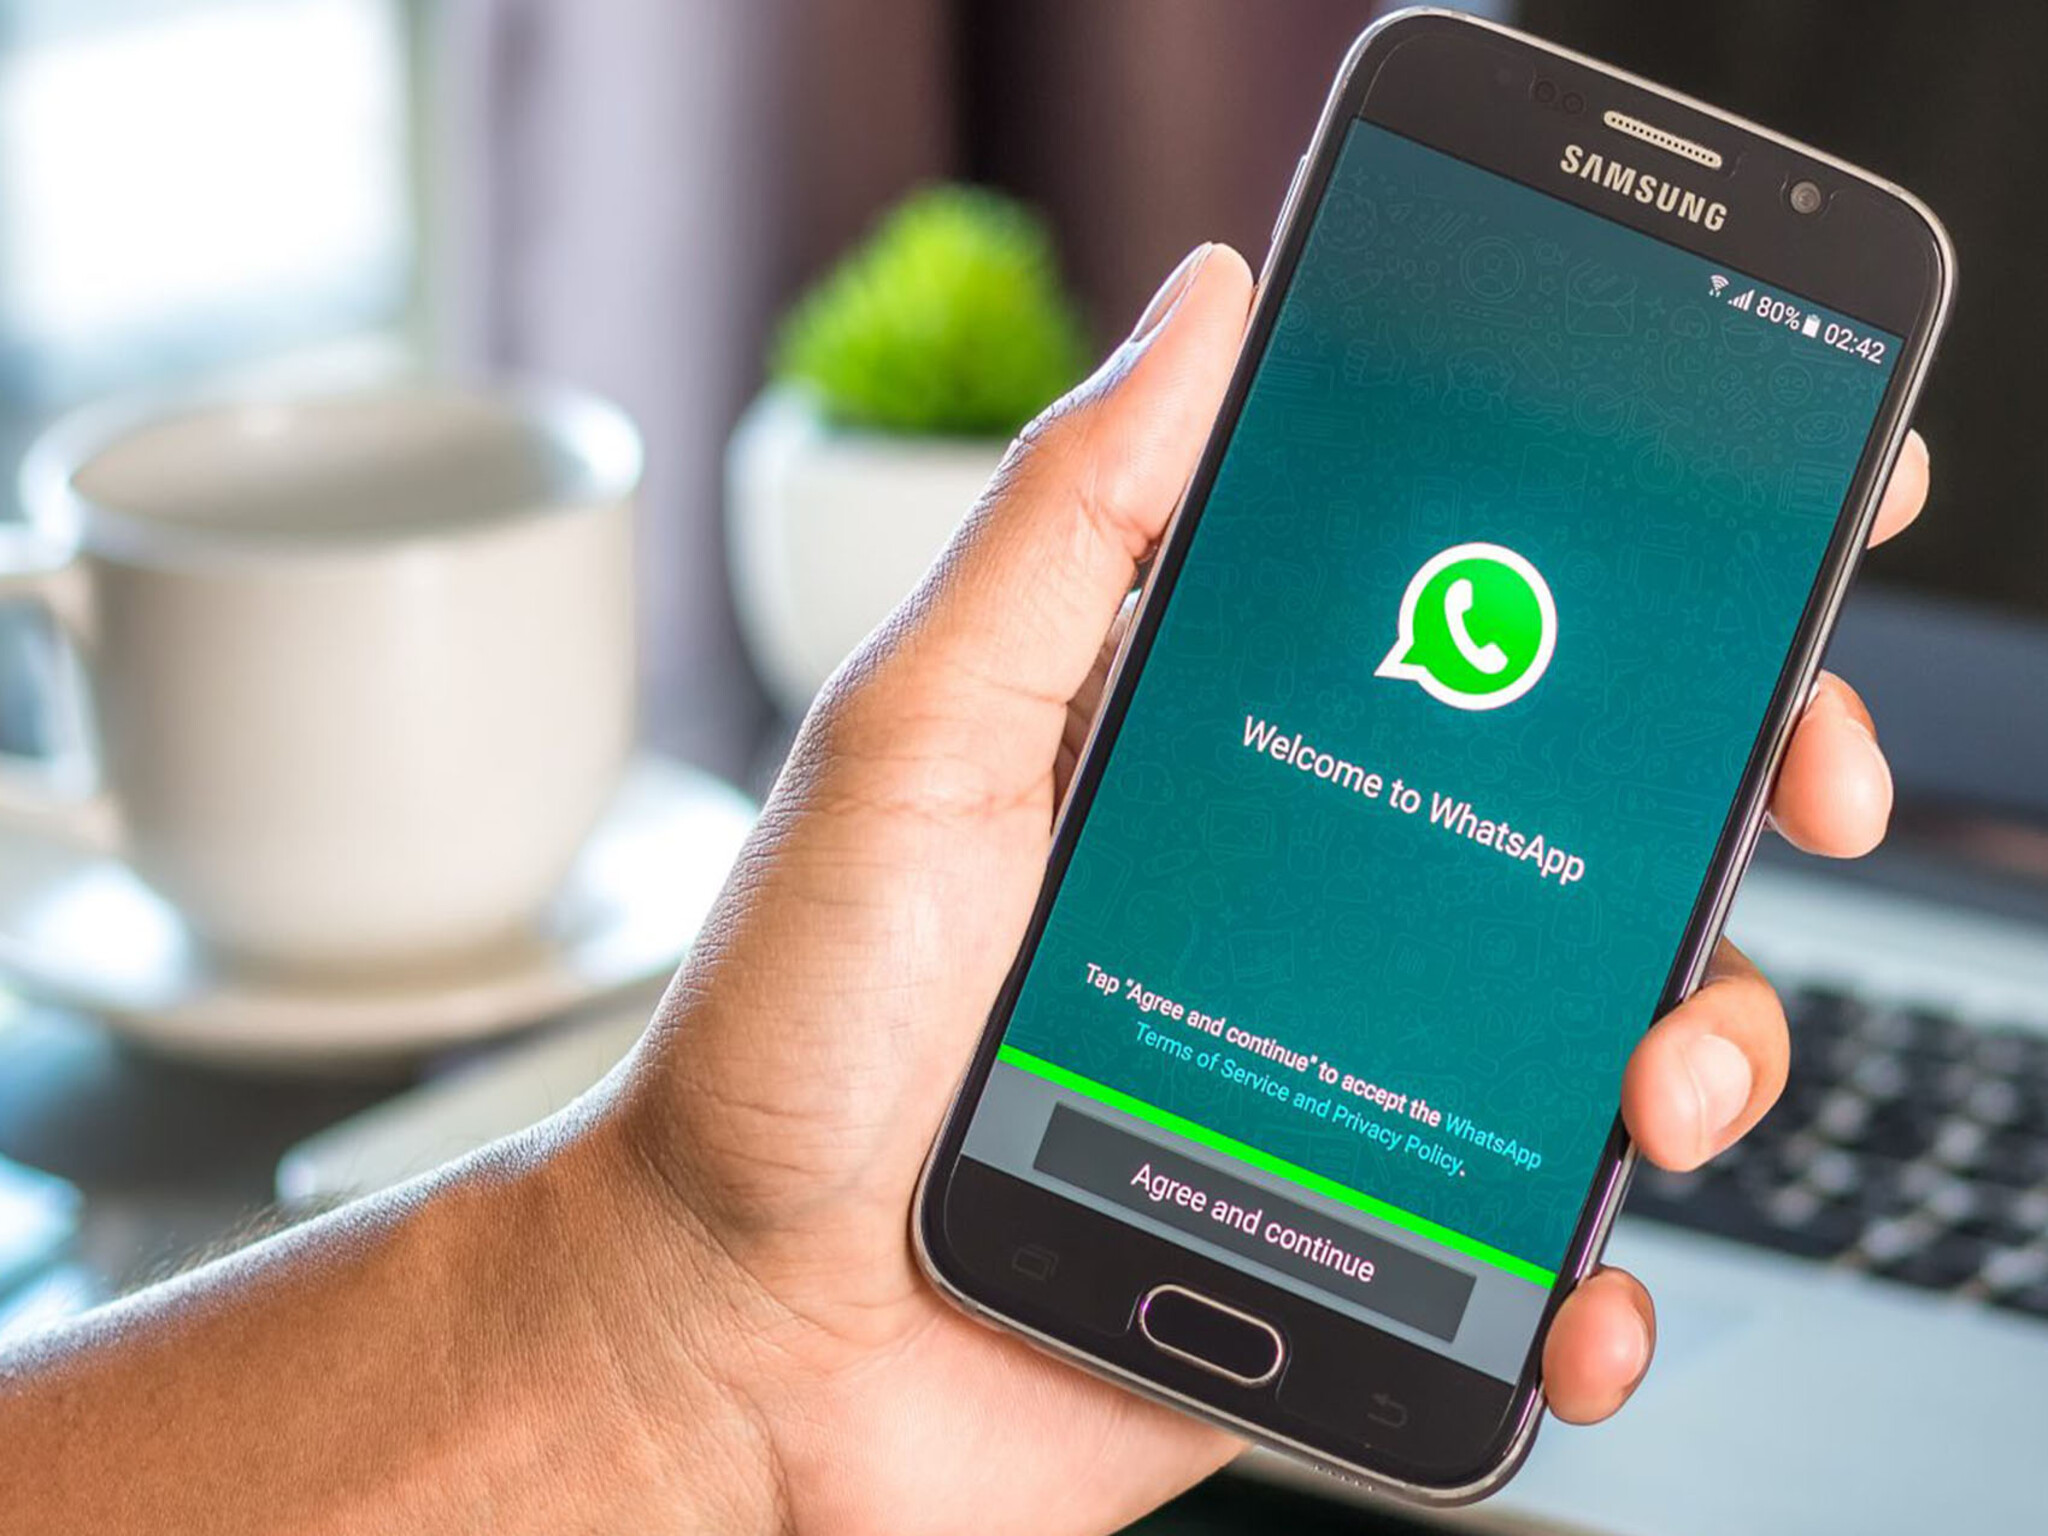 The UAE warns residents against WhatsApp messages to win 800 dirhams